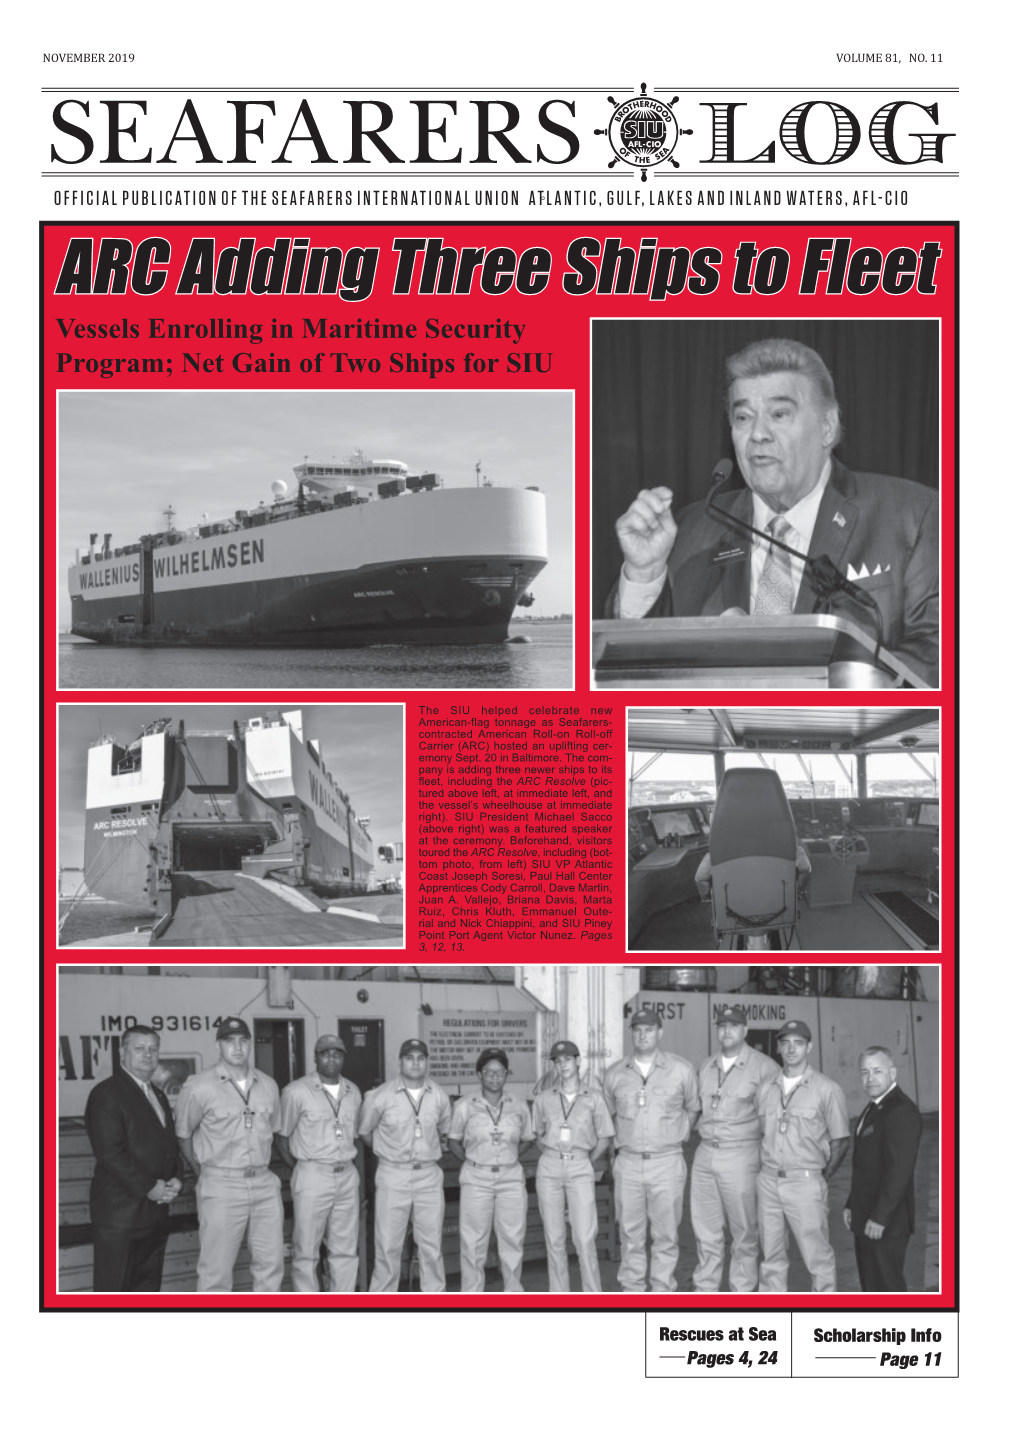 ARC Adding Three Ships to Fleet Vessels Enrolling in Maritime Security Program; Net Gain of Two Ships for SIU